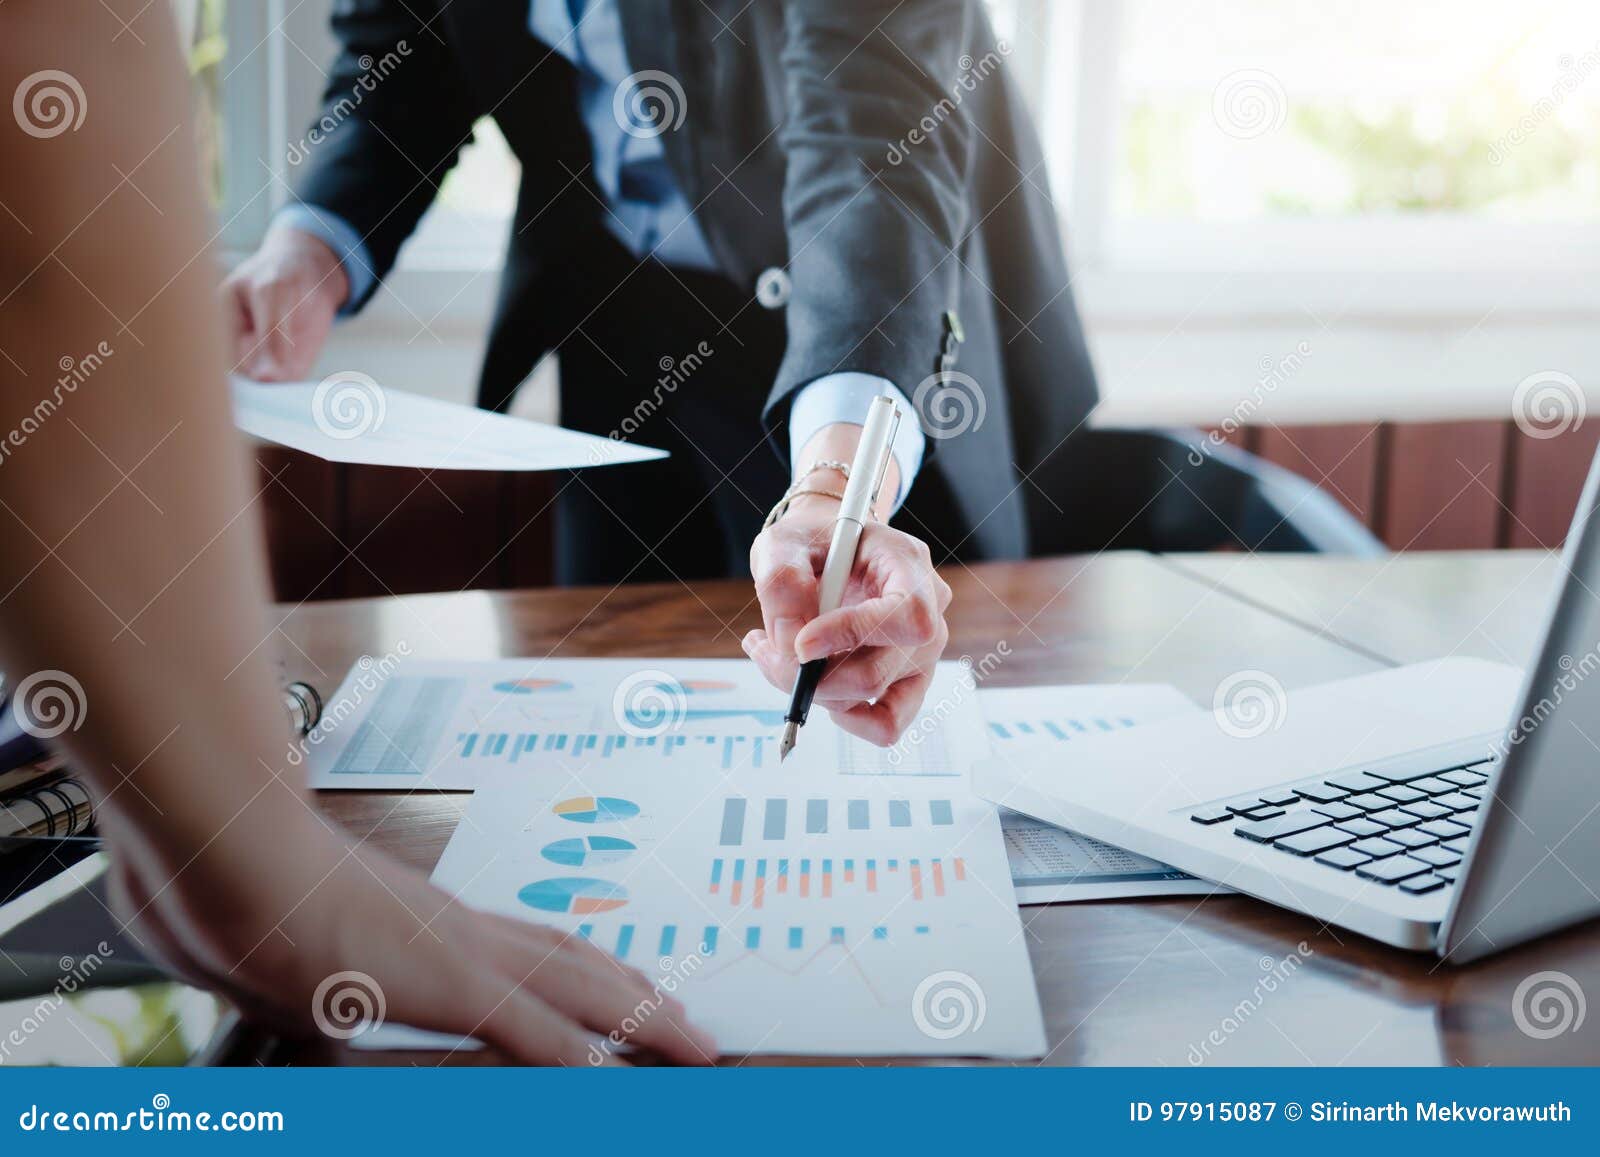 working business people analyse high performance marketing data.